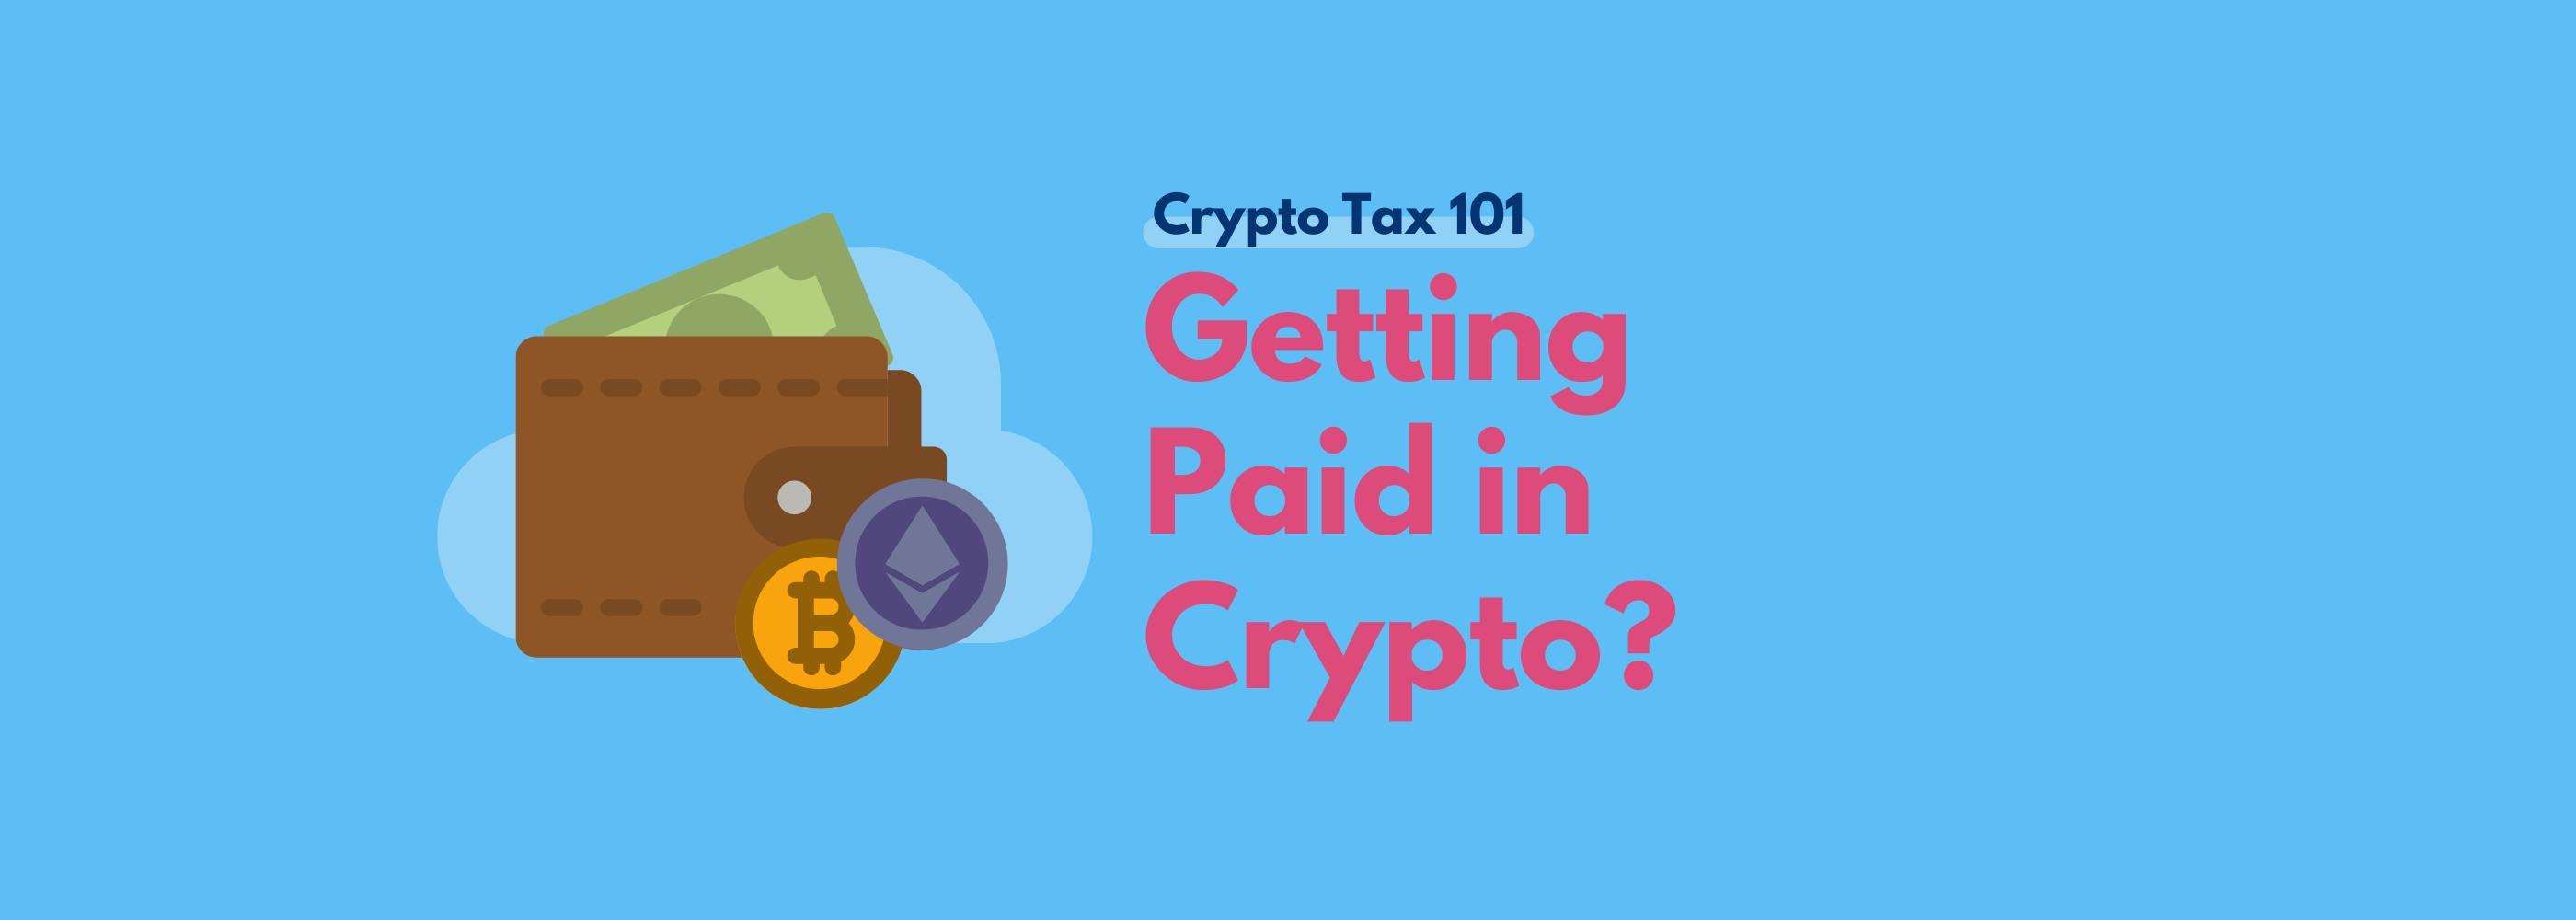 Koinly explains tax when getting paid in crypto